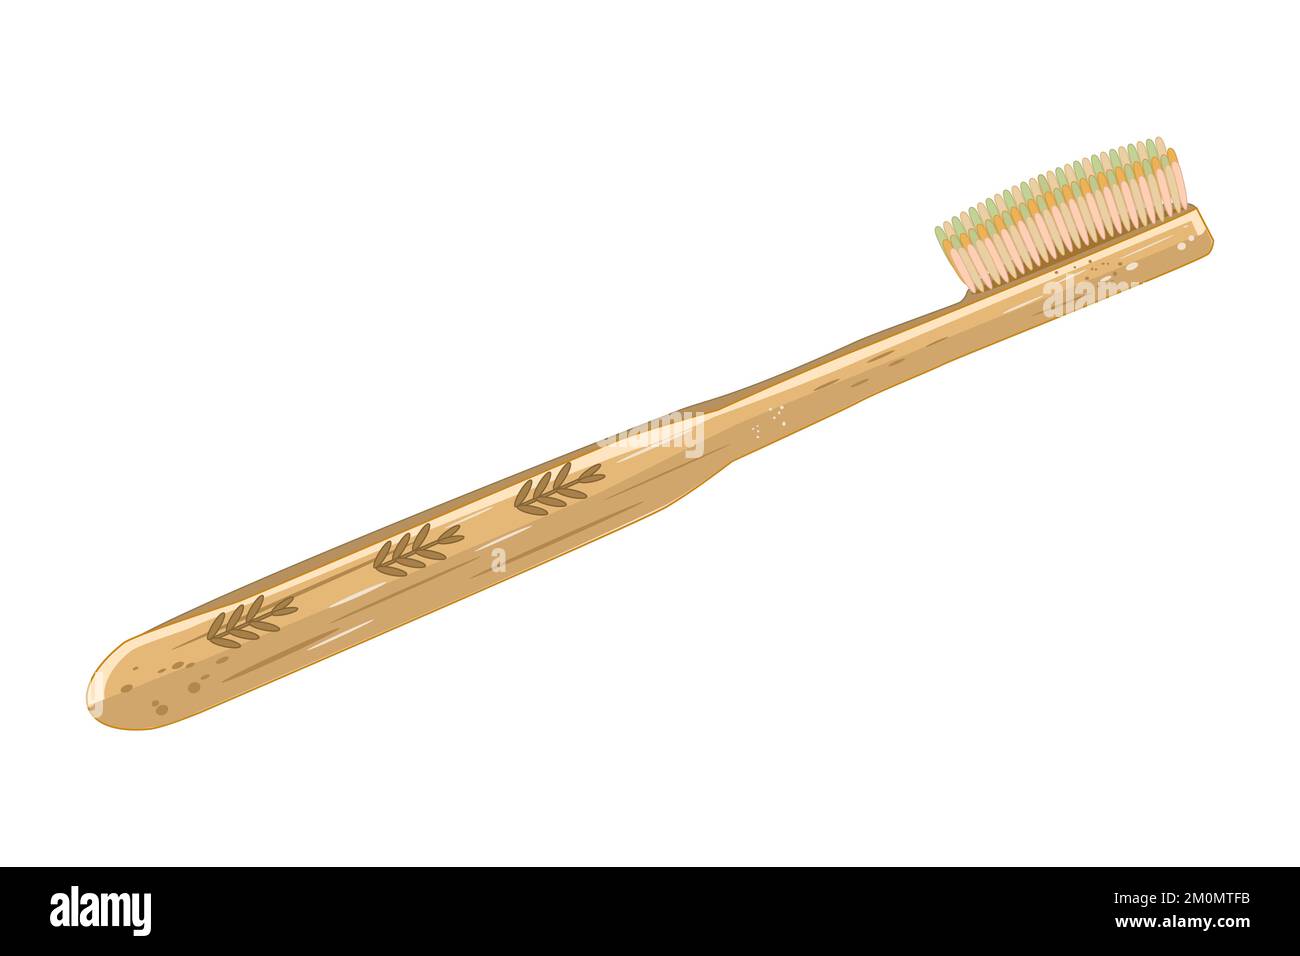 Bamboo toothbrush. Wooden tooth brush icon. Eco natural toothbrush. Eco friendly of biodegradable material product. Zero waste and no plastic. Vector Stock Vector